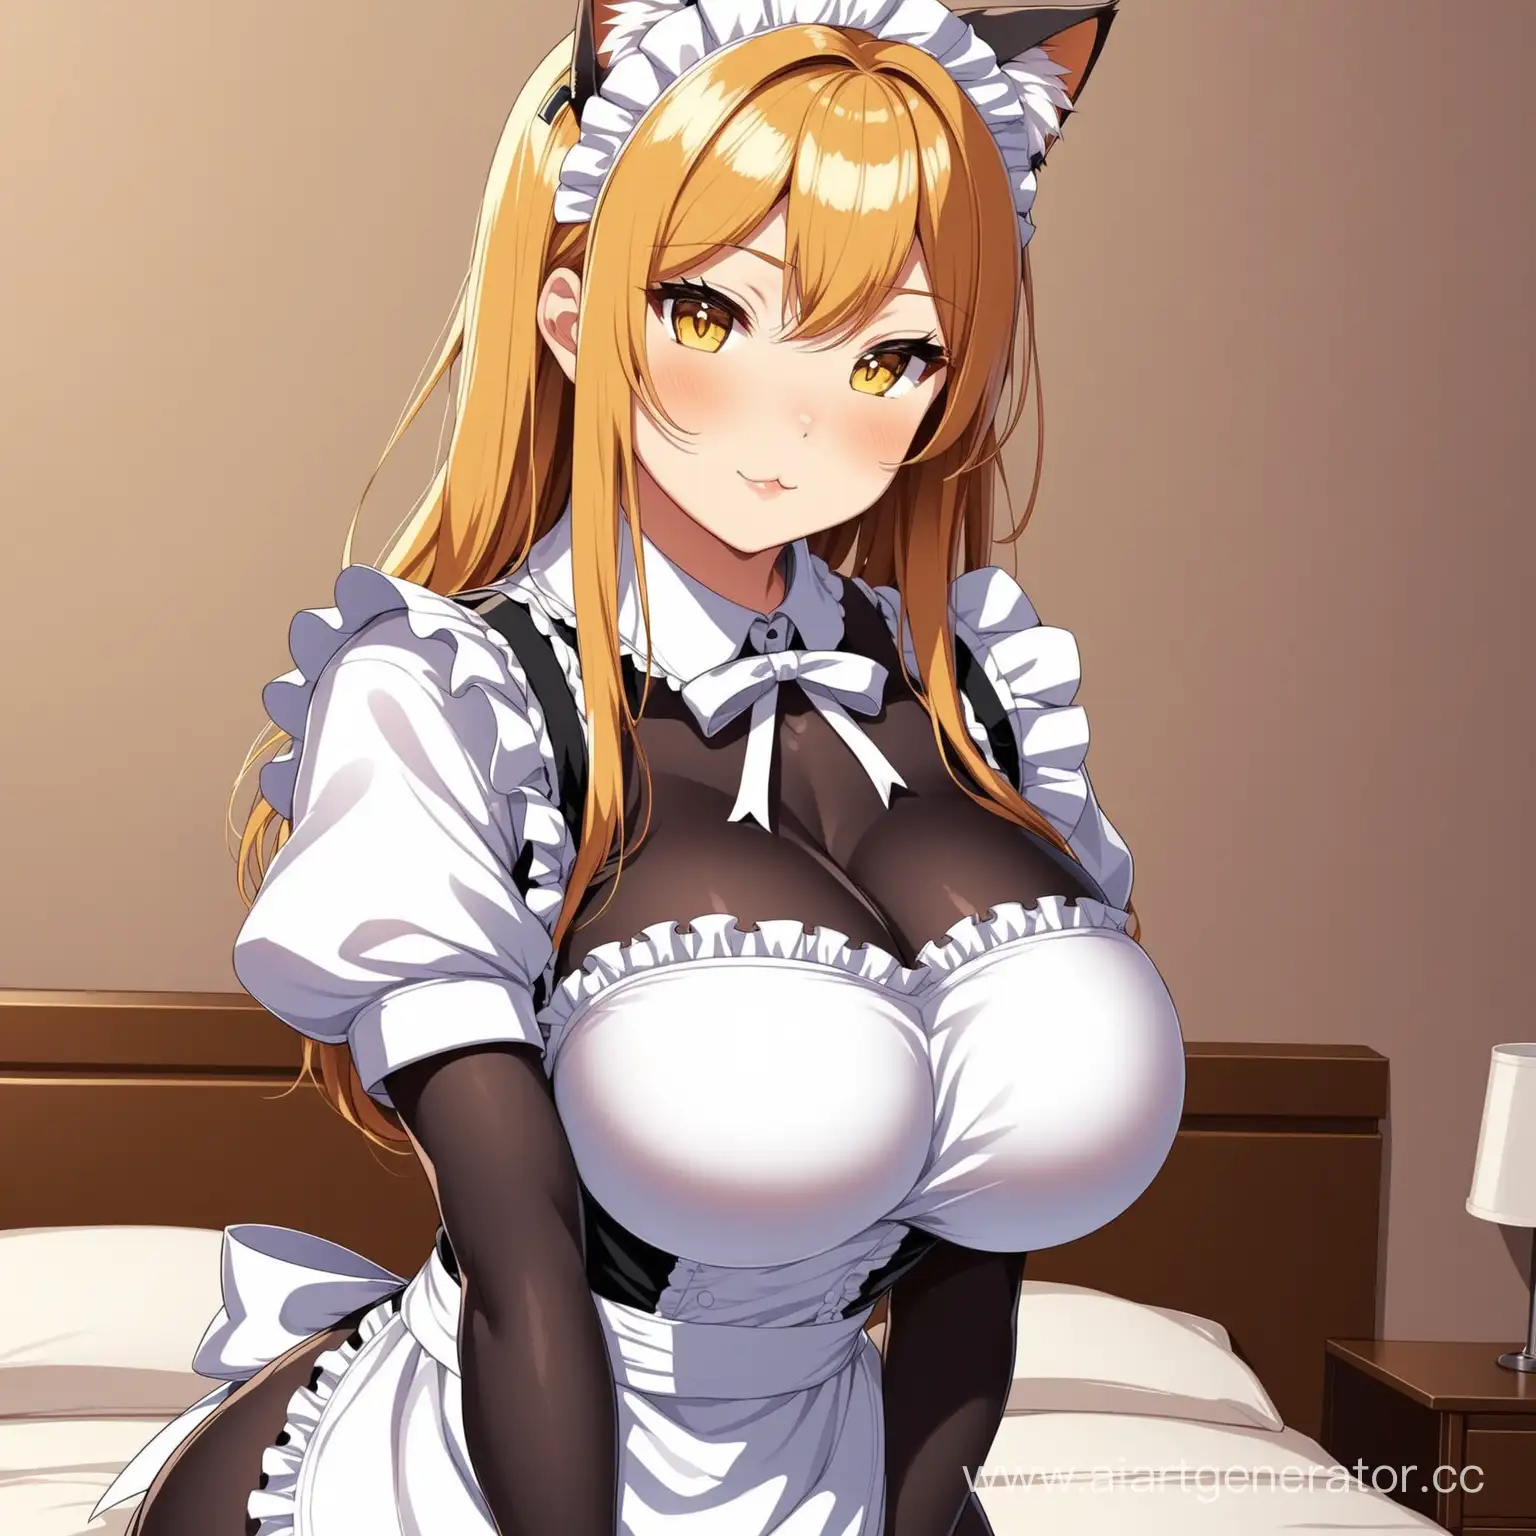 Maid-Cat-Girl-with-Curvaceous-Figure-Playful-Milf-Cosplay-Art